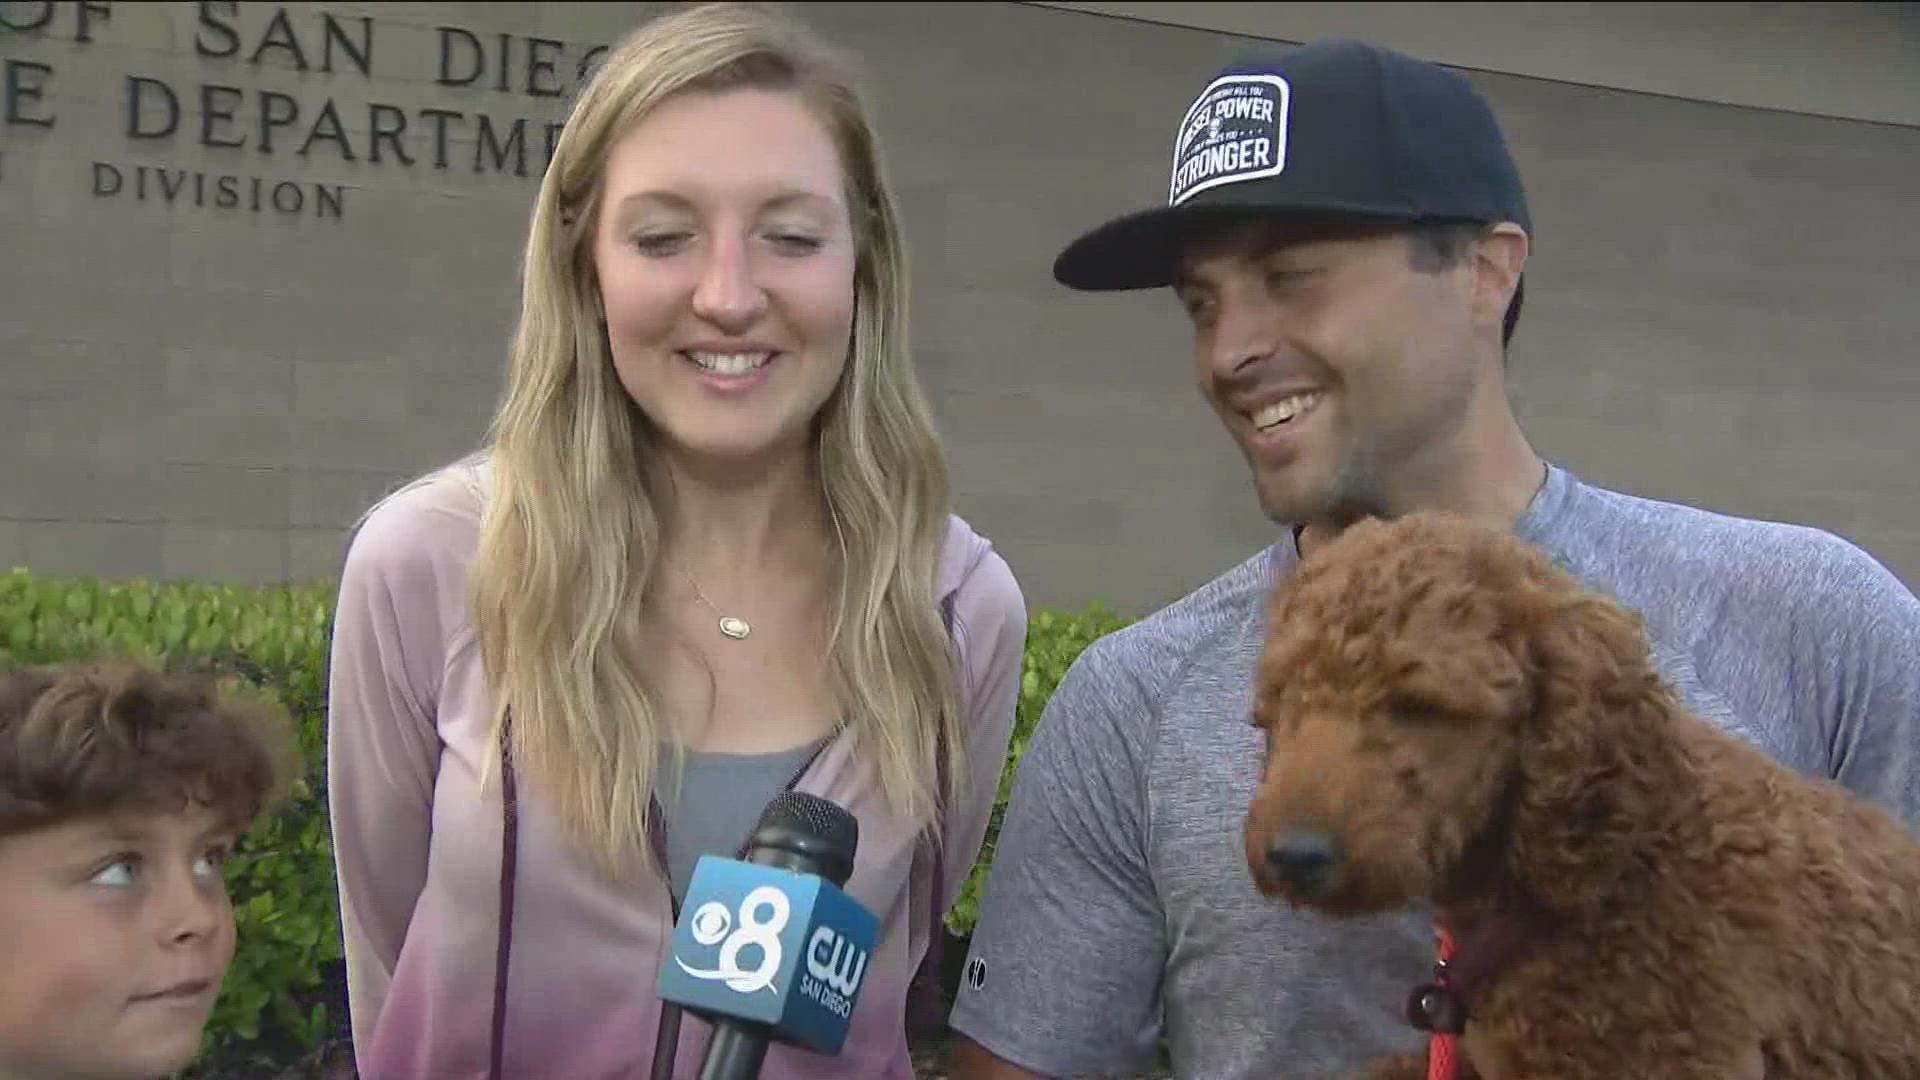 After driving all night, a Utah family Friday was reunited with its Goldendoodle, Chancho, who was stolen from a recreational vehicle campground in San Diego.